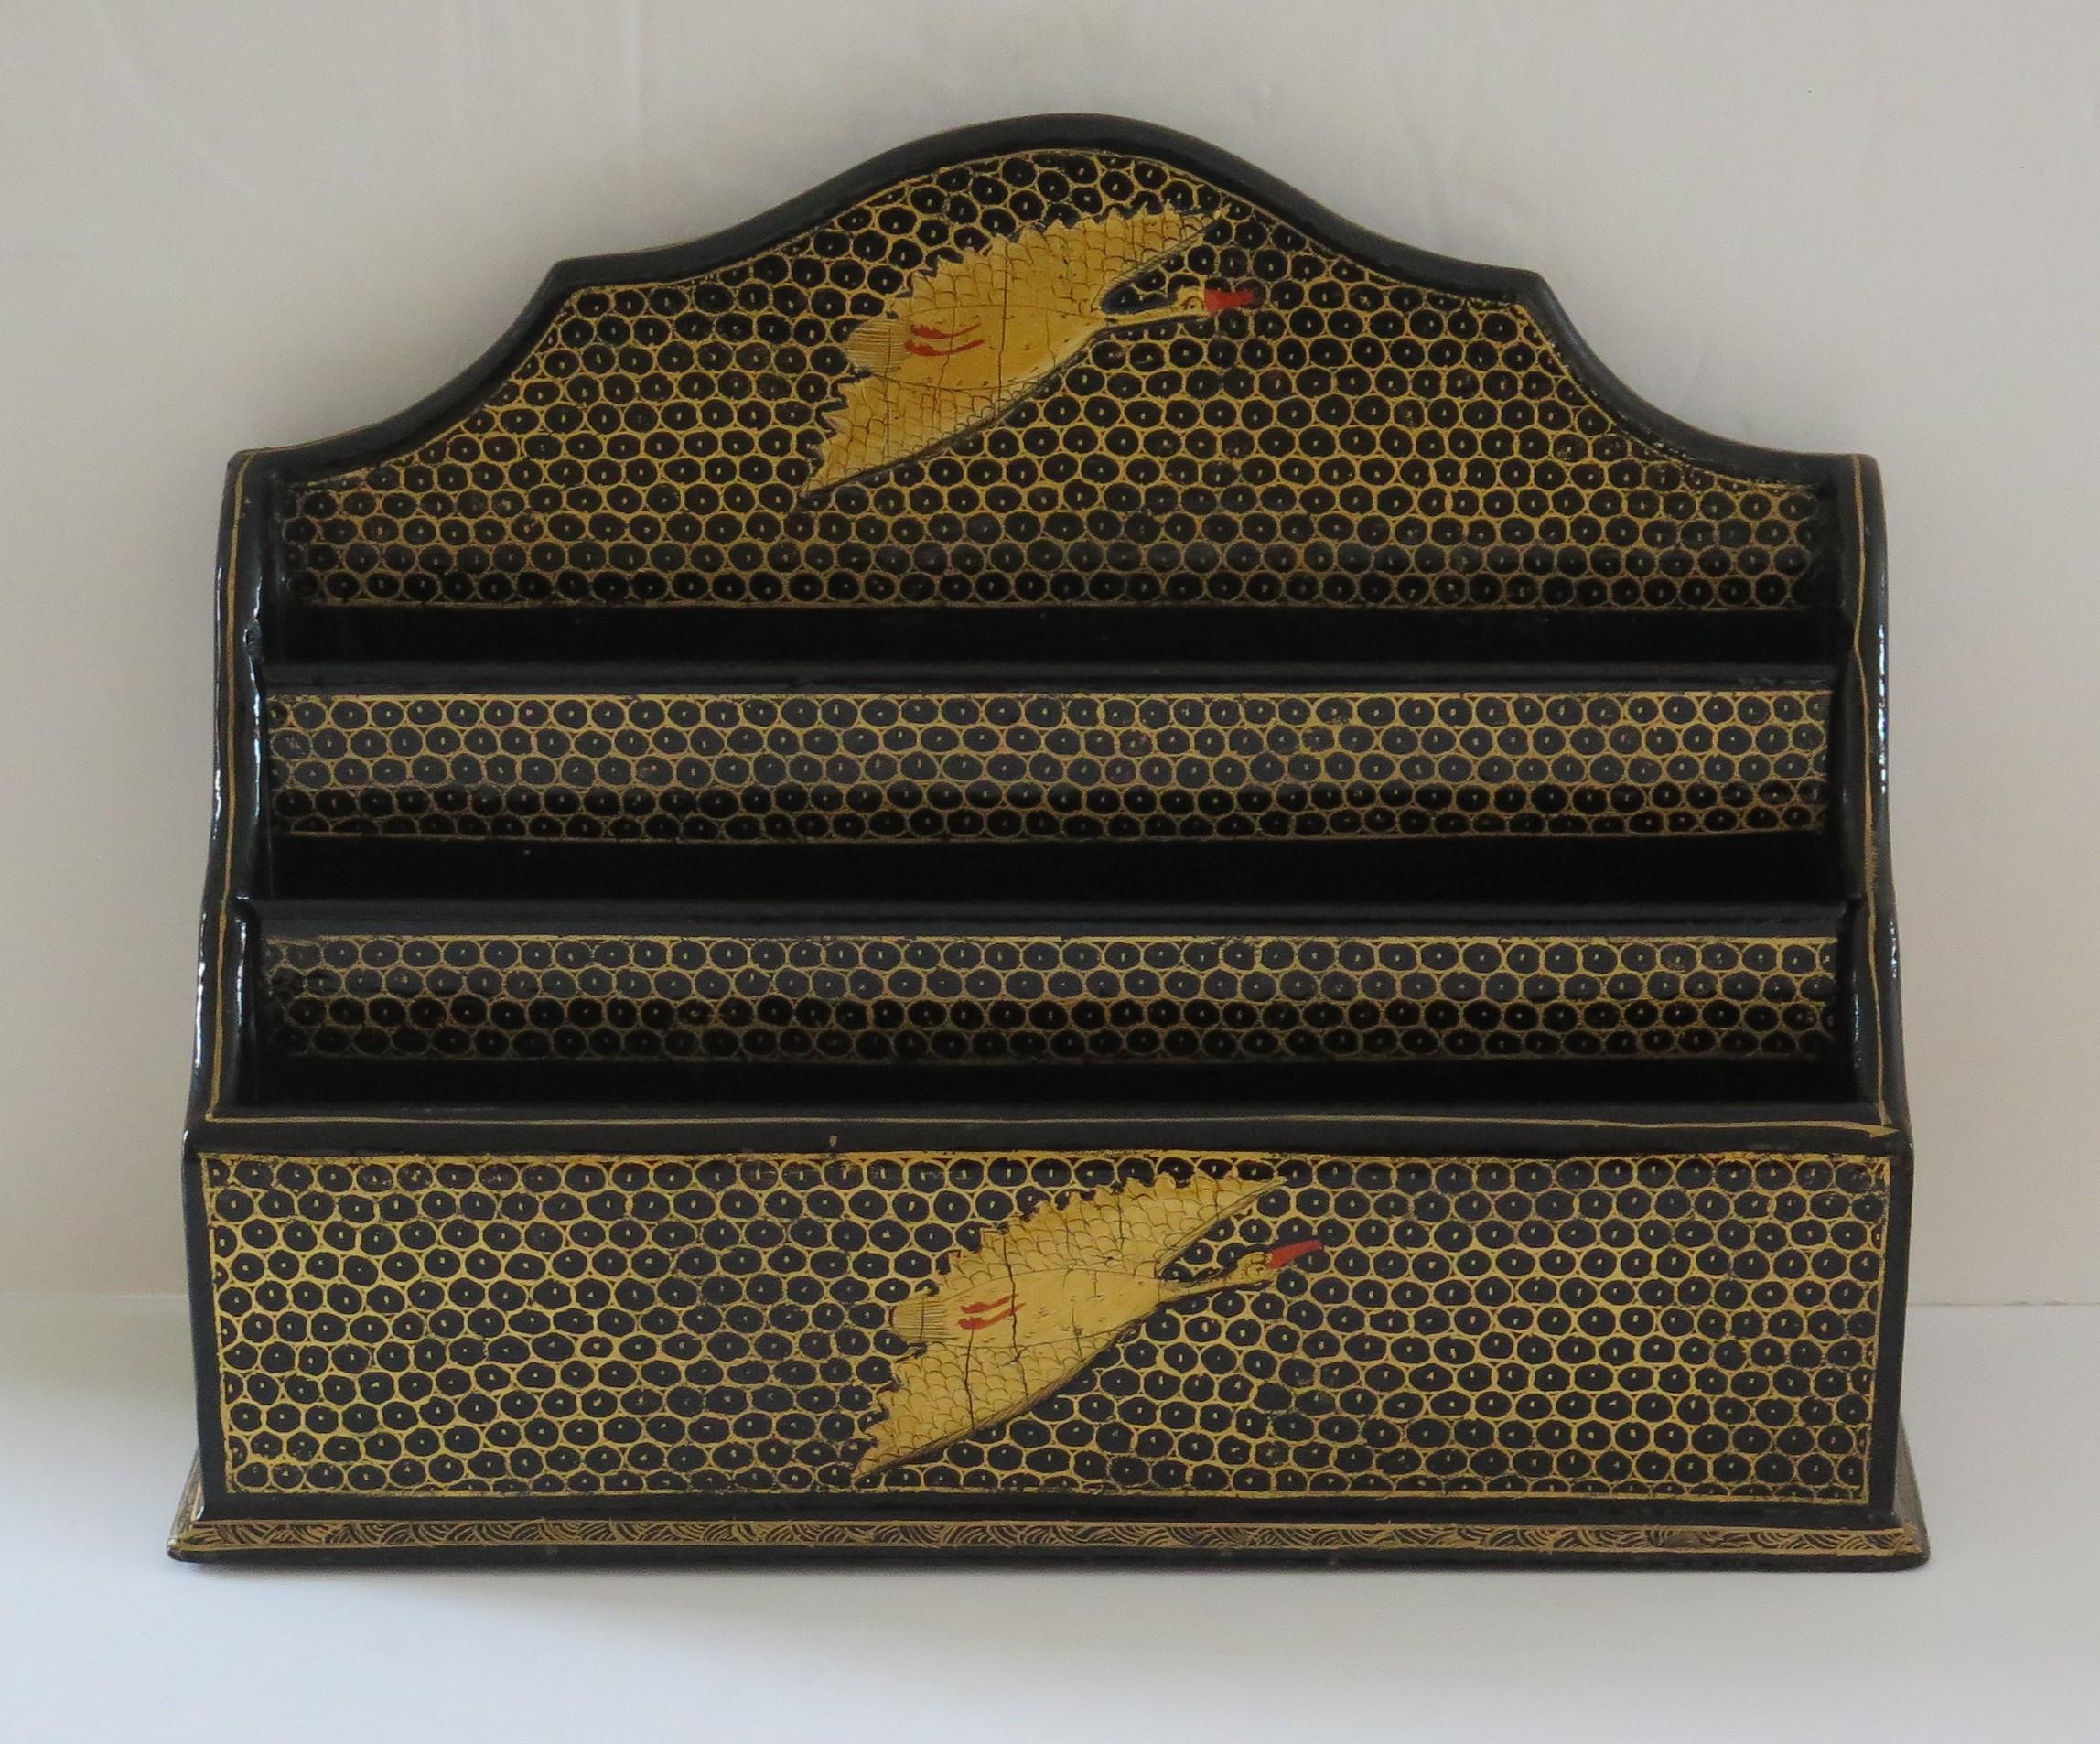 This is a very good black lacquered Letter Rack, hand enameled and gilded, made in Japan during the Taisho period, early 20th Century, Circa 1920.

The letter rack has three vertical compartments. 

This is a very distinctive piece, beautifully